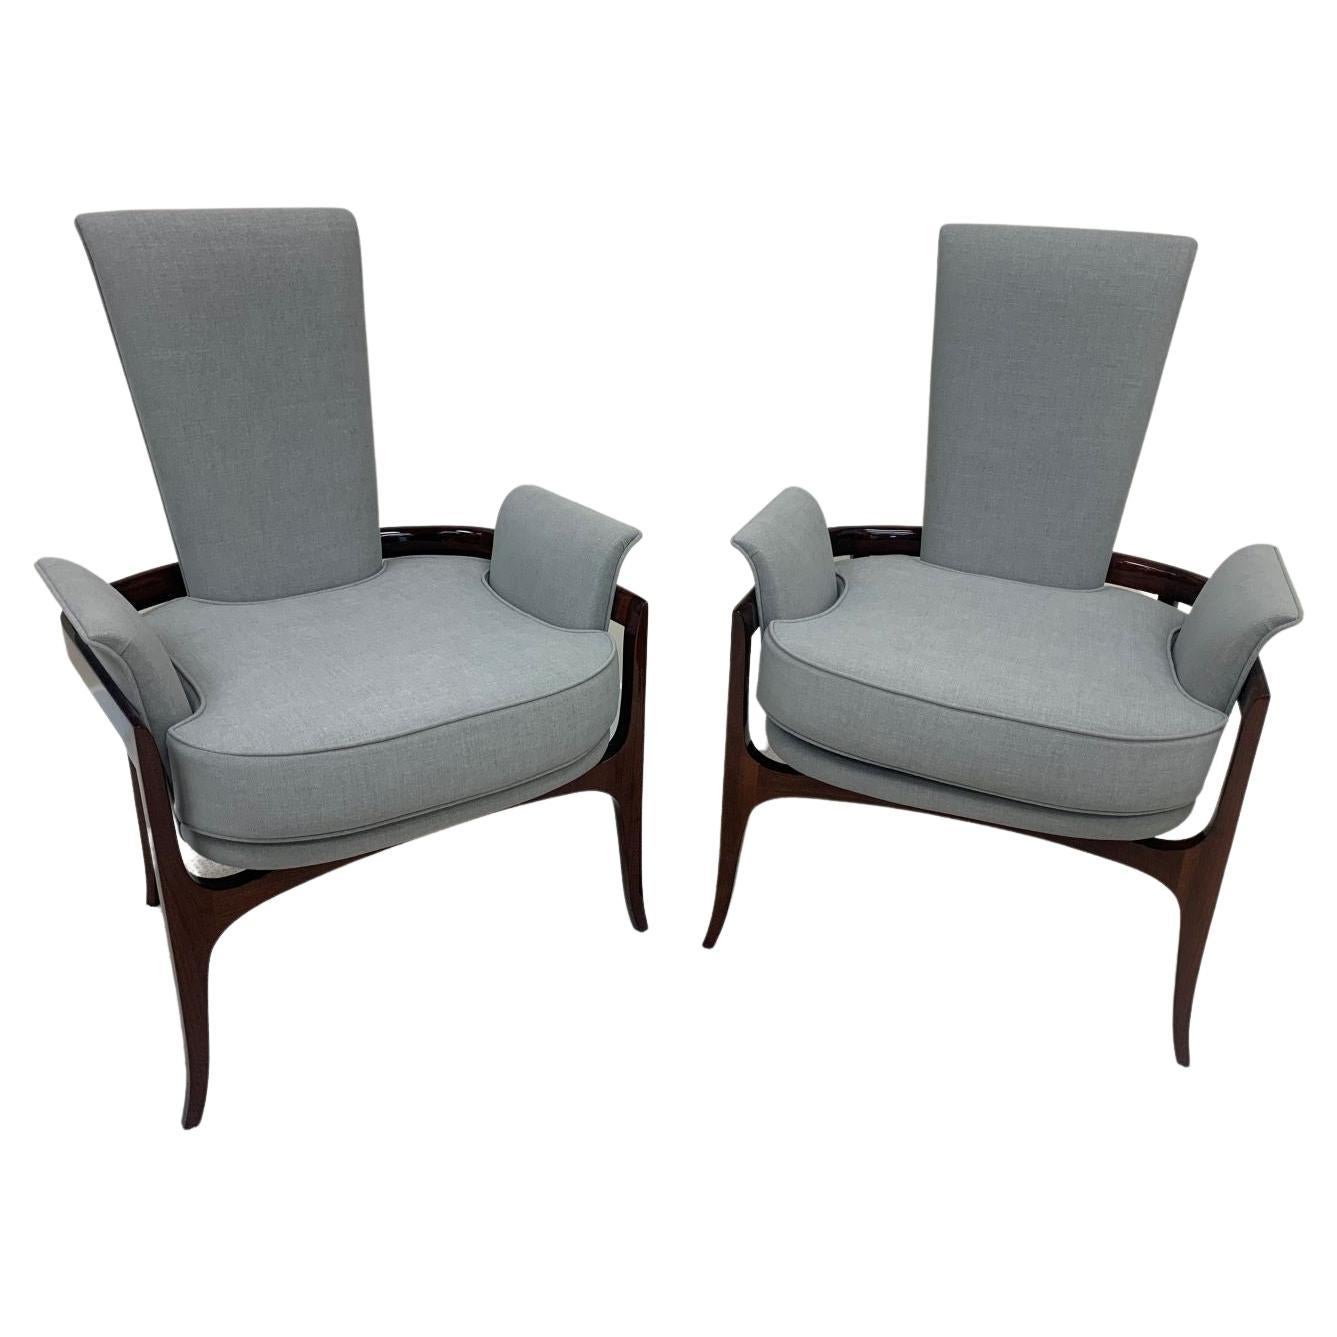 Mid-Century Modern sculptural pair of lounge chairs in the style of James Mont. Incredible design with the gentle curving upholstered arms and back that are wrapped in a solid walnut frame. Beautifully restored in a gray linen fabric with a gloss